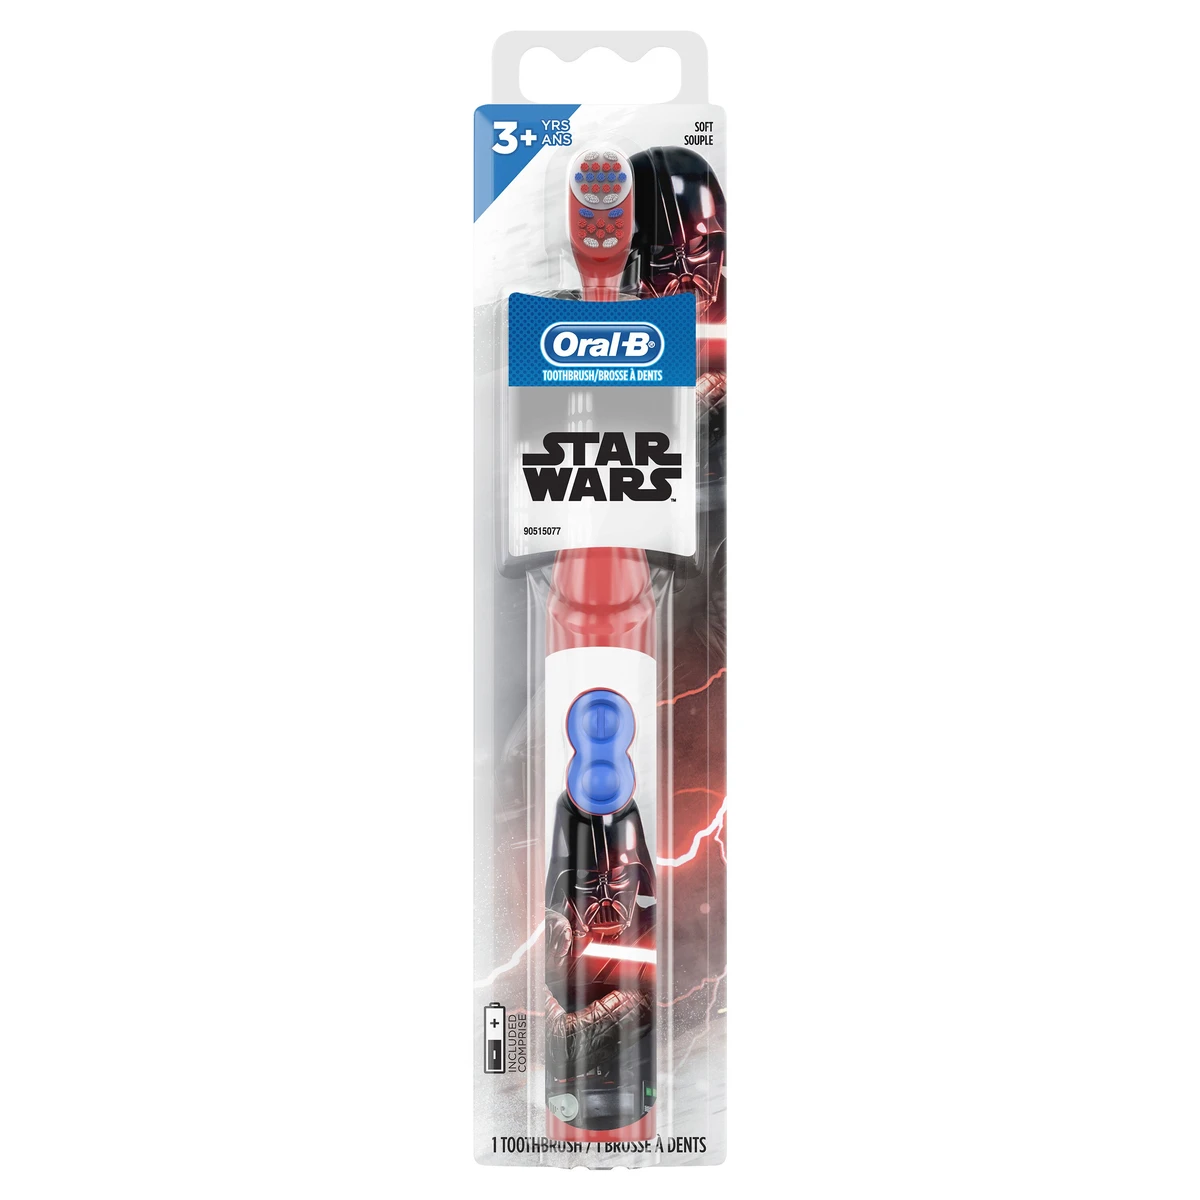 Oral B Kid's Battery Toothbrush featuring Star Wars Soft Bristles for Kids 3+